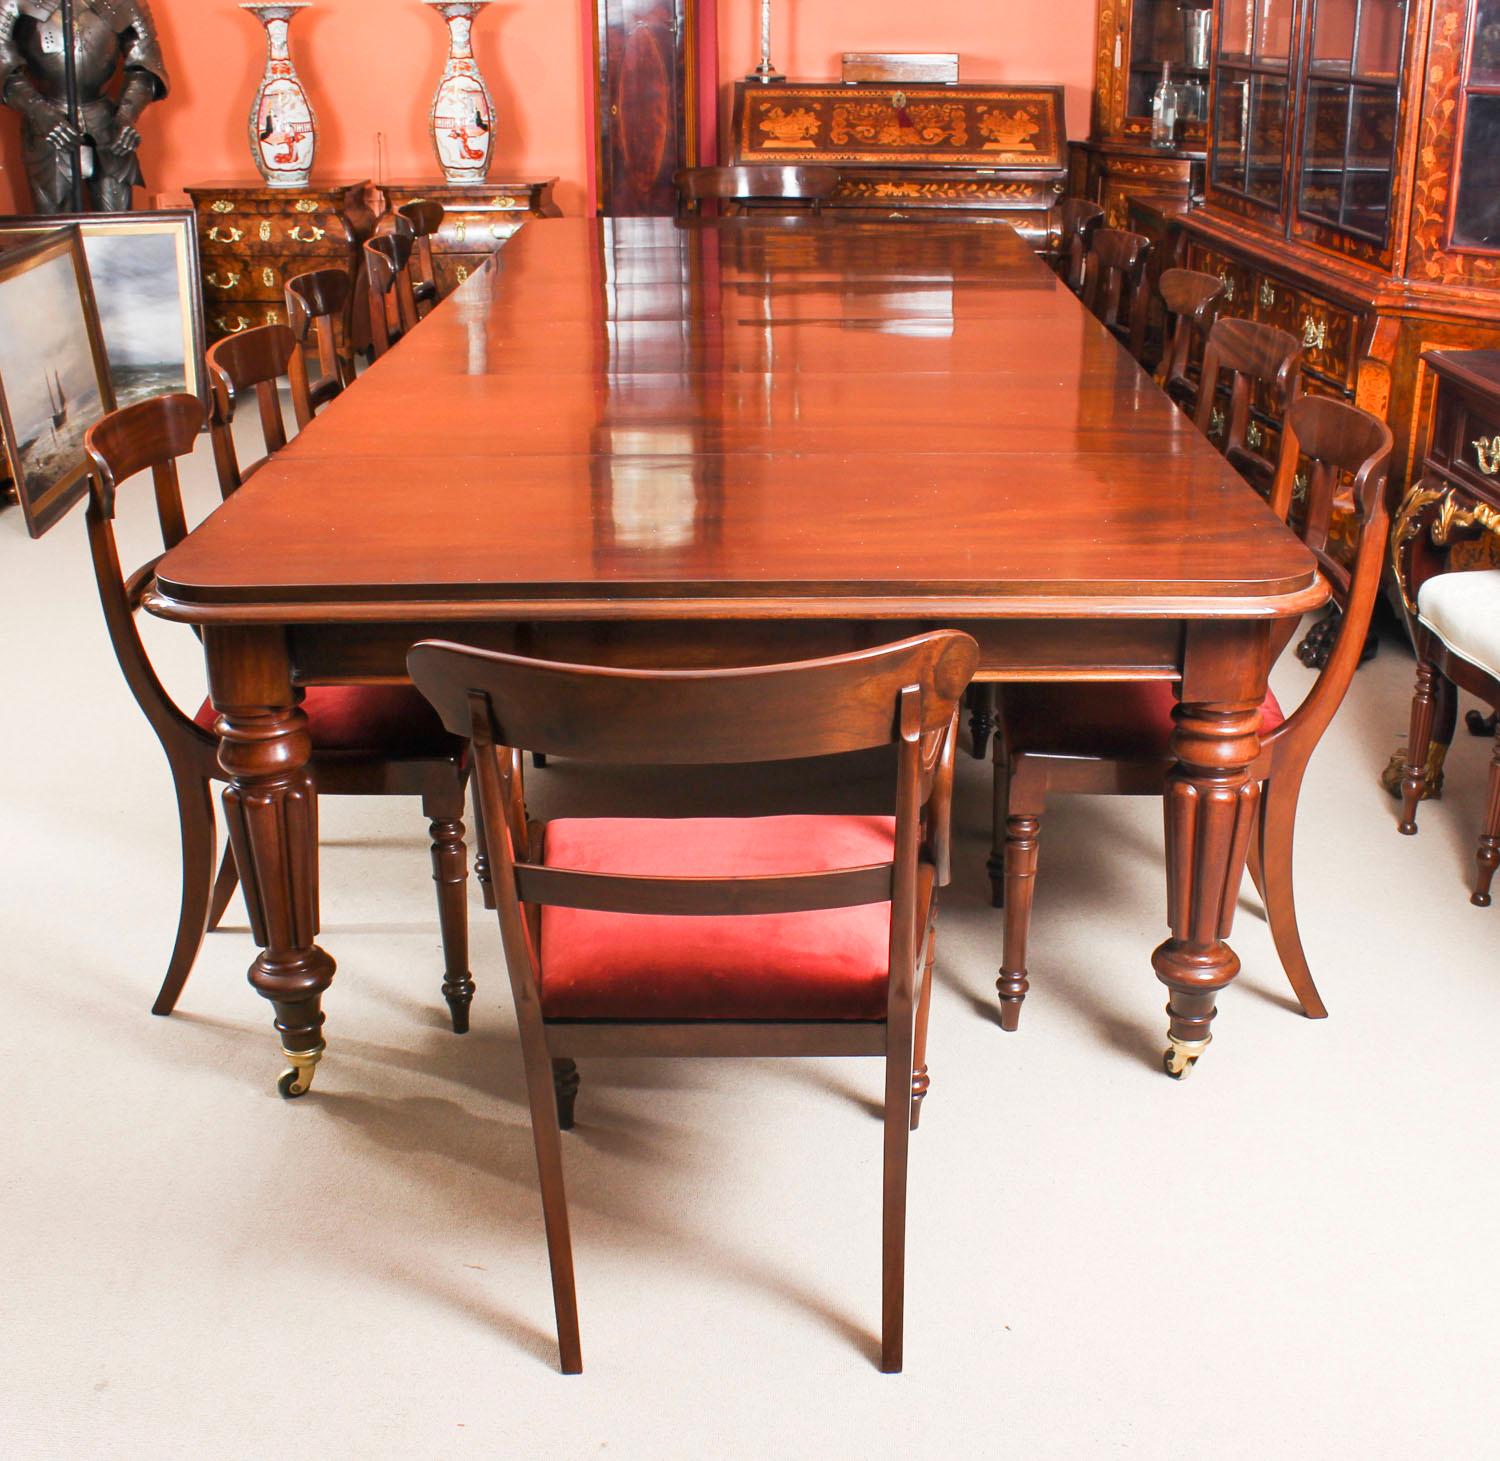 This is a magnificent antique dining set comprising a William IV solid mahogany dining table and a set twelve antique dining chairs circa 1830 in date.
 
This beautiful table has a rounded rectangular top with a molded edge. The top is in stunning